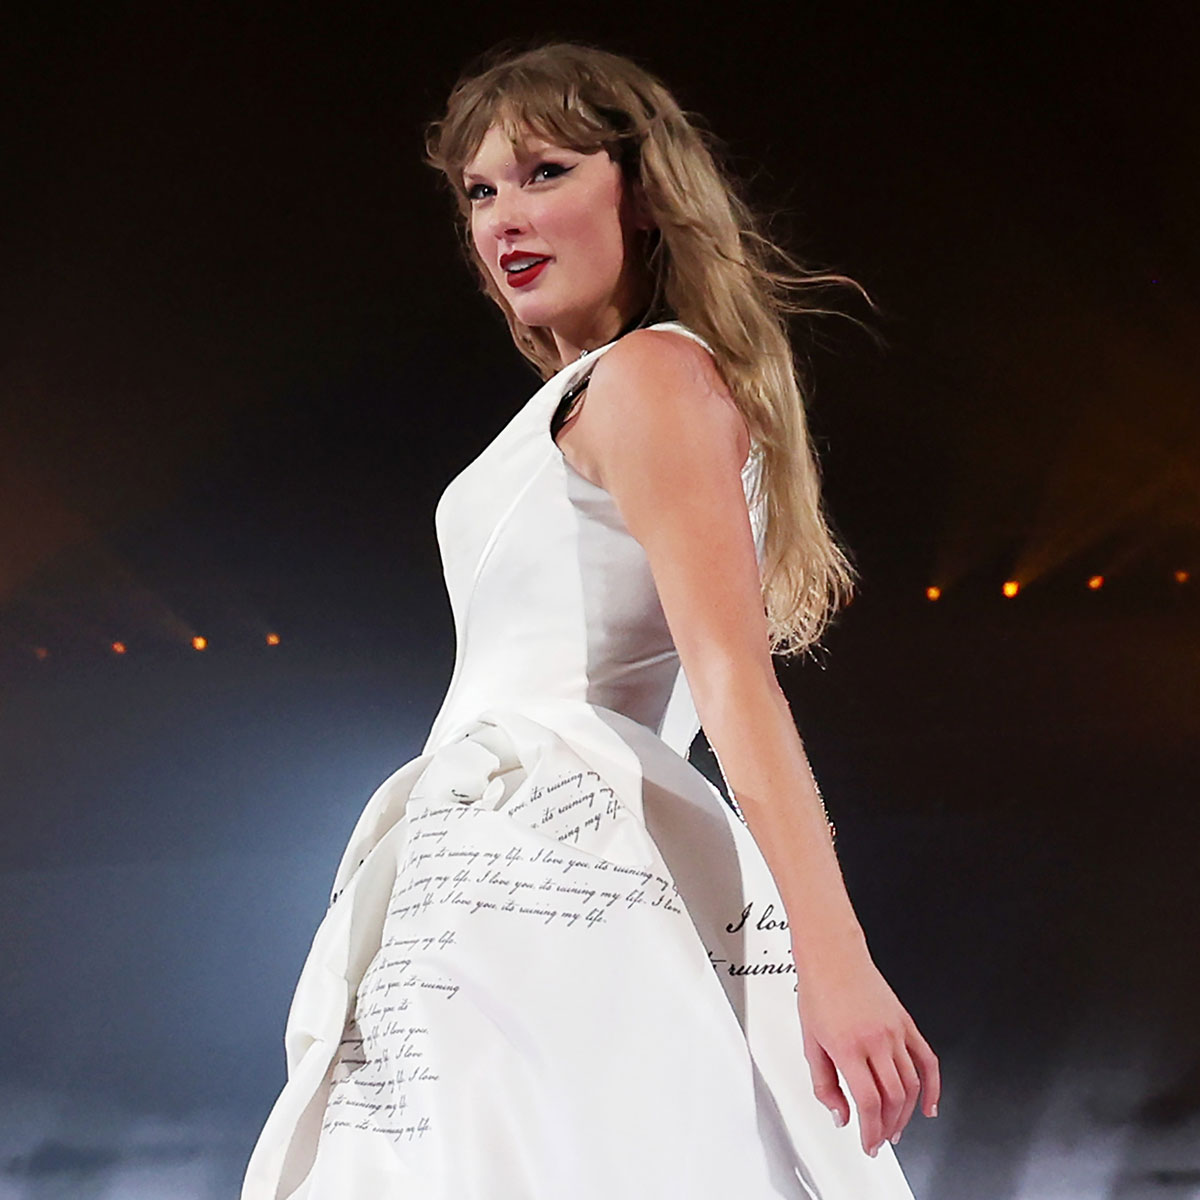 Taylor Swift Just Debuted New Eras Tour Outfits in Paris—See the Pics